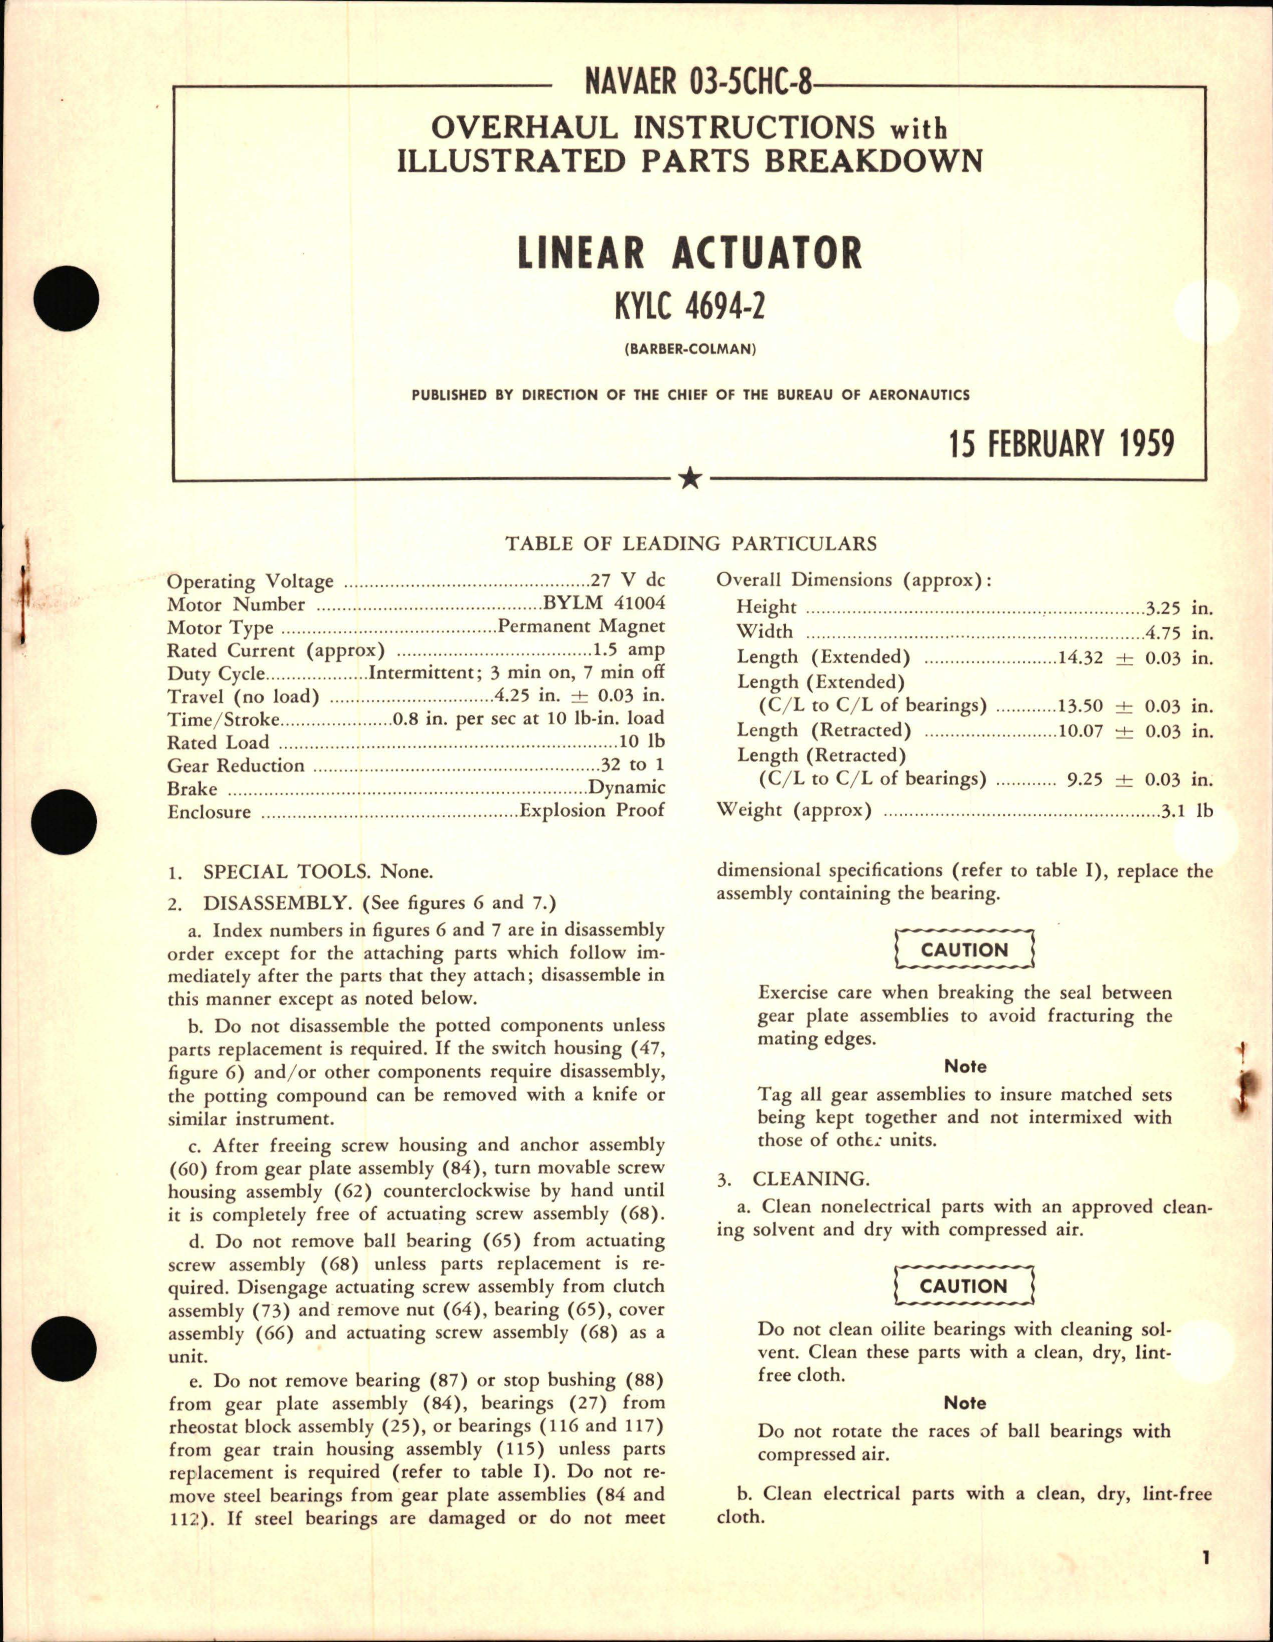 Sample page 1 from AirCorps Library document: Overhaul Instructions with Illustrated Parts Breakdown for Linear Actuator - KYLC 4694-2 